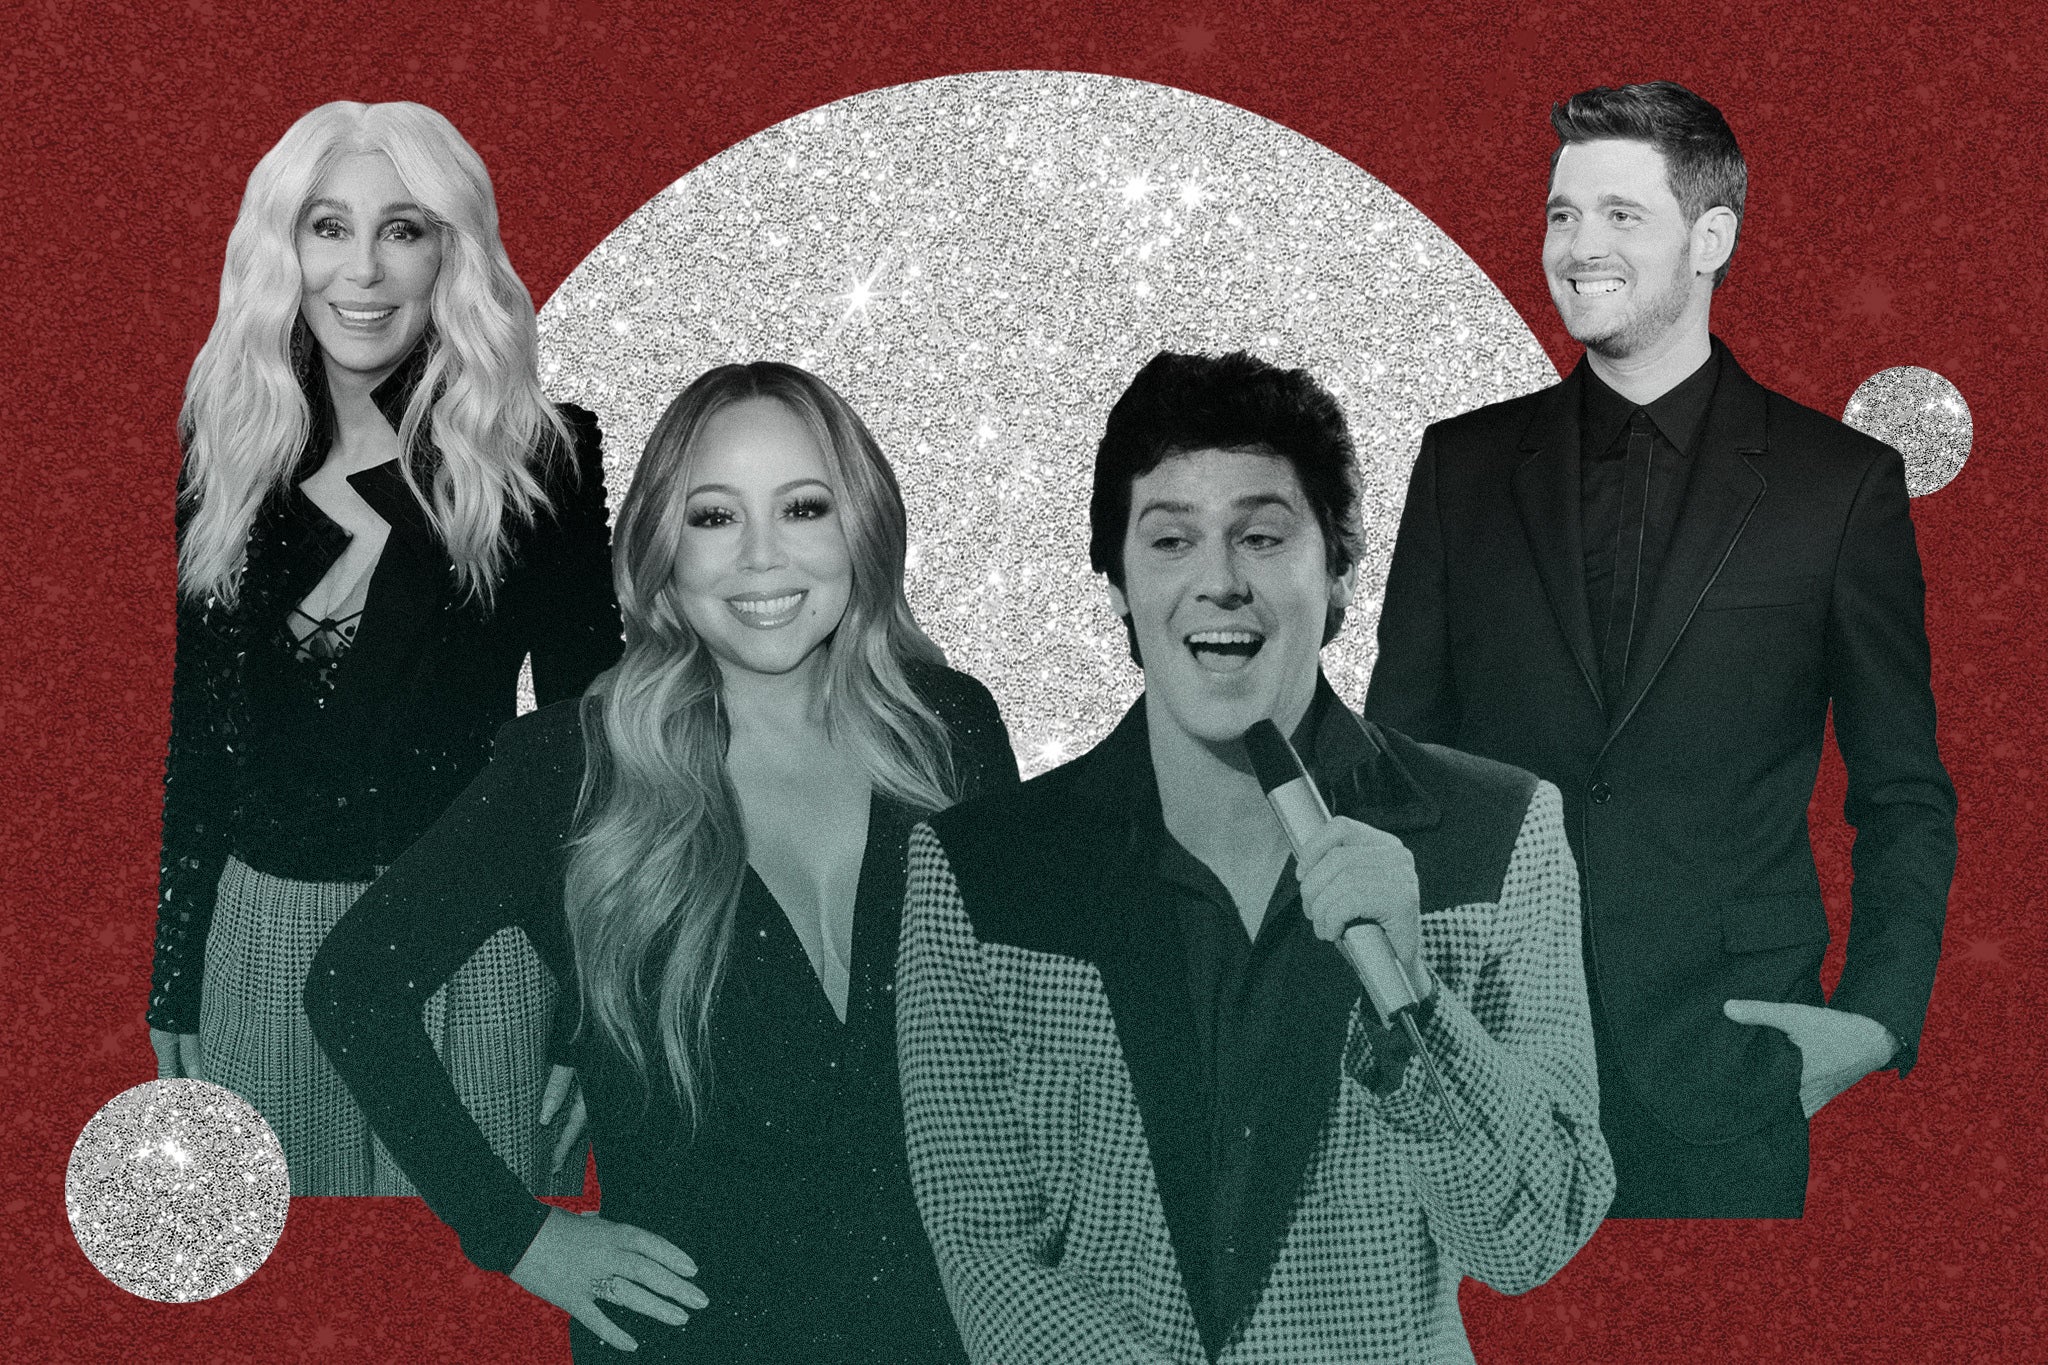 Festive: Cher, Mariah Carey, Shakin’ Stevens and Michael Bublé are among the stars who’ve released Christmas albums